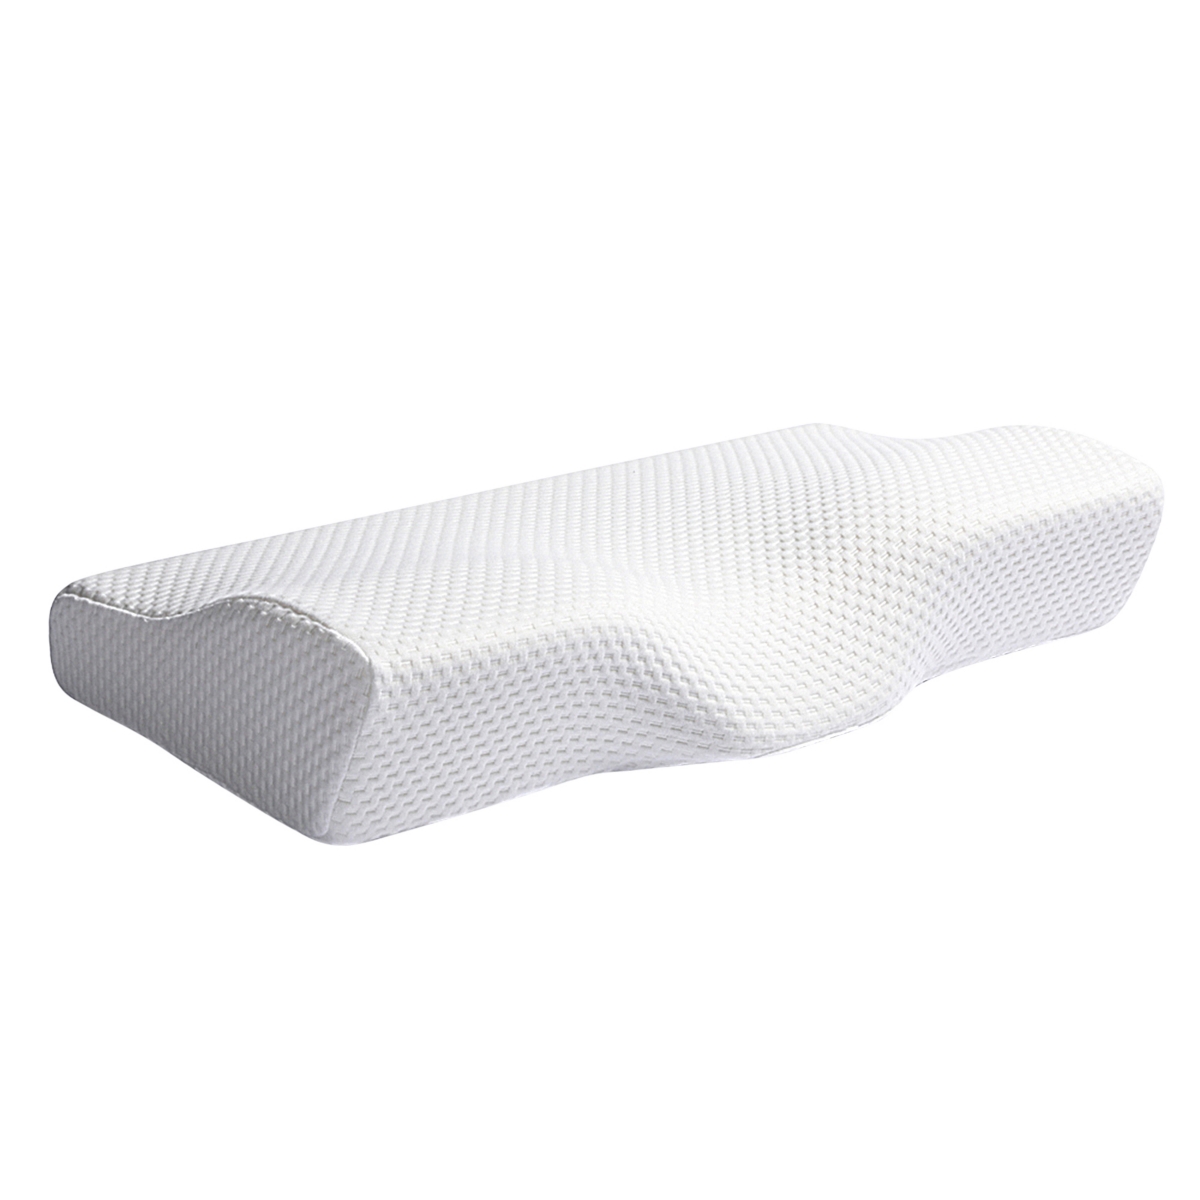 Dr Pillow Cool Air Memory Foam Pillow By Doctor Pillow In White